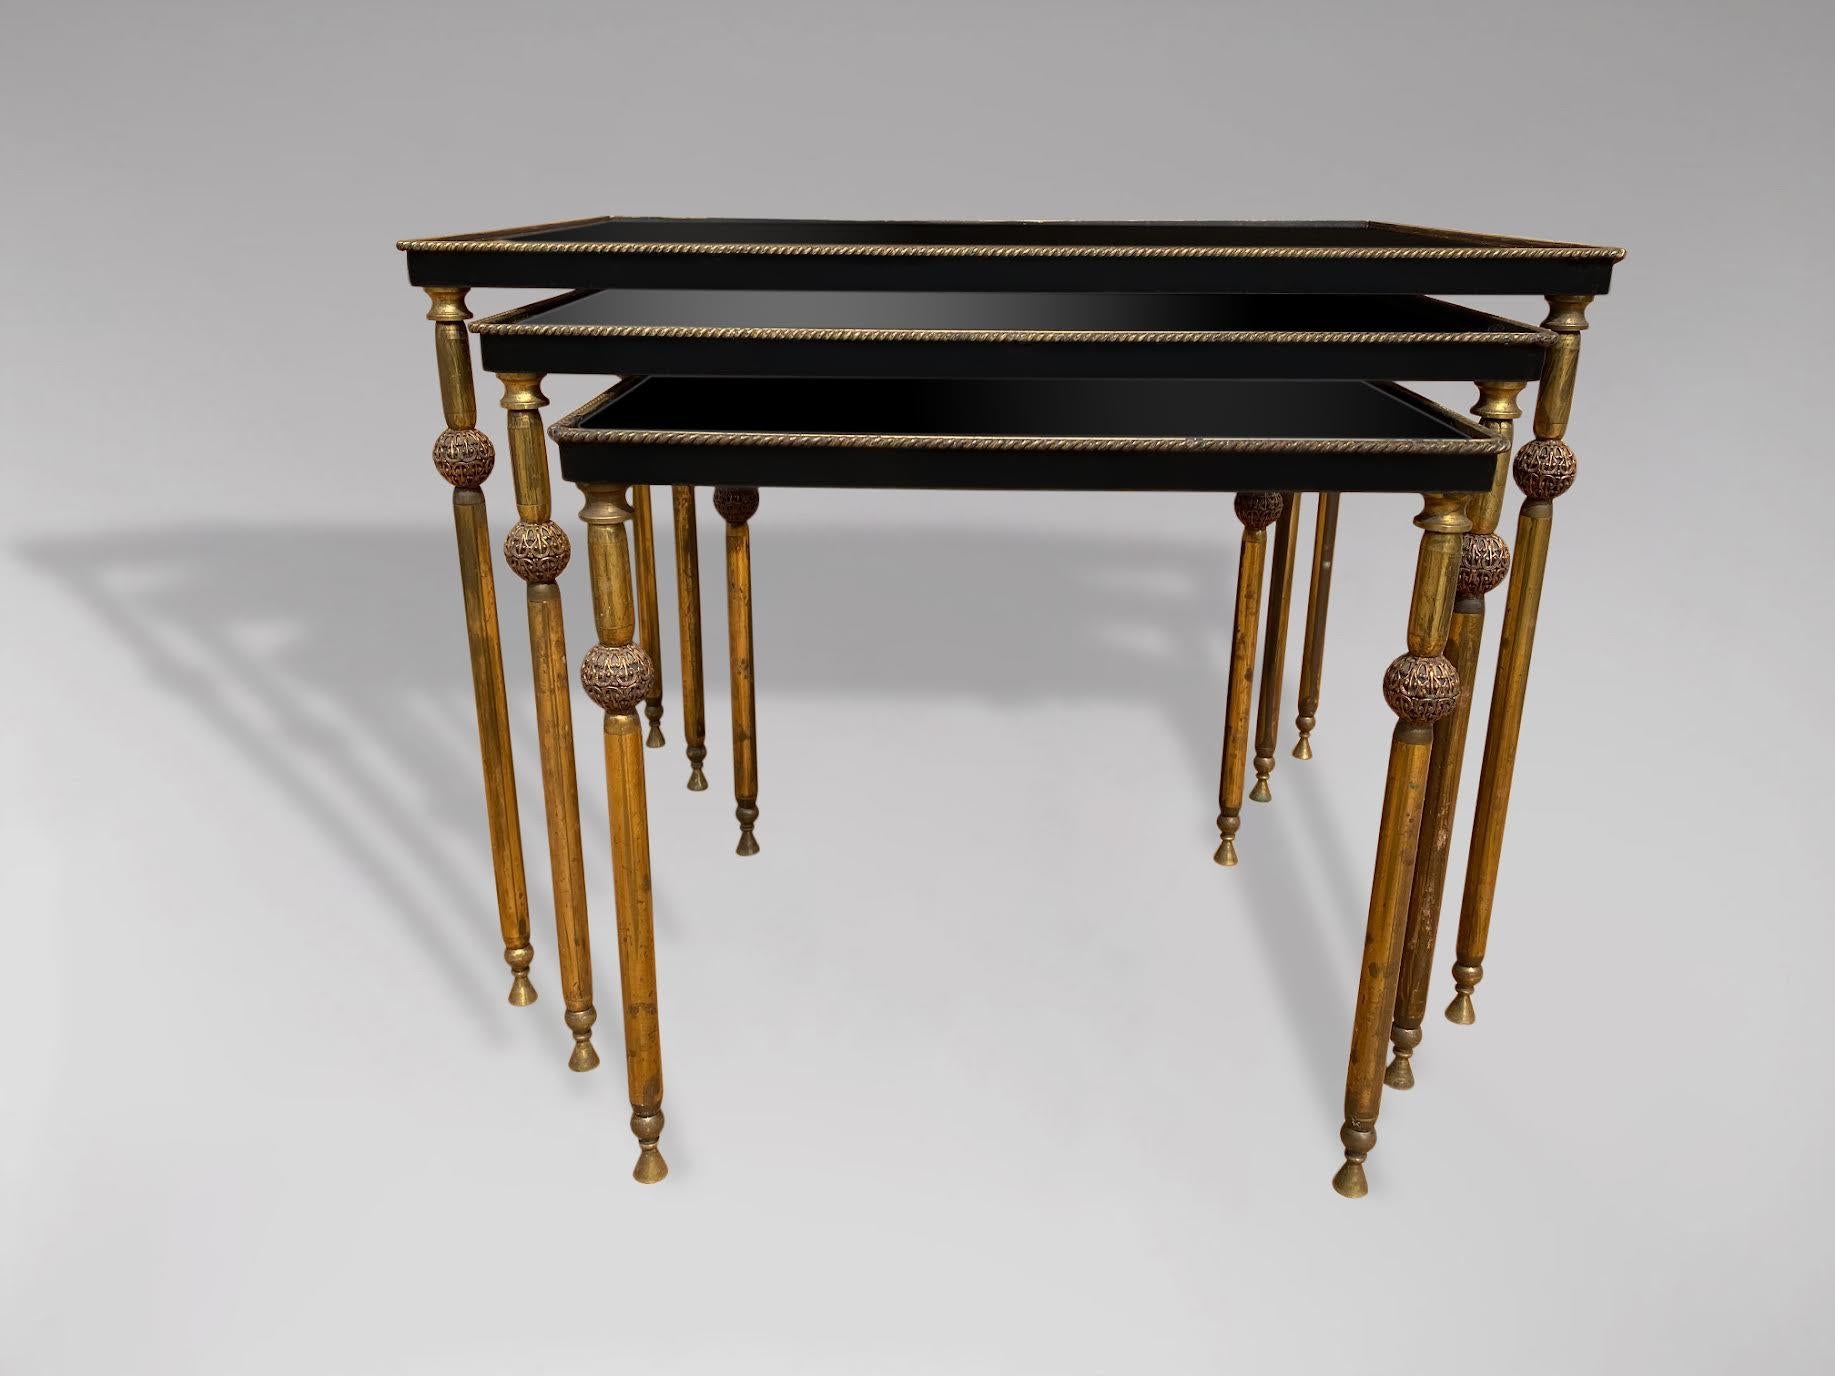 Neoclassical 20th Century Nest of 3 Brass Tables with Black Lacquered Mirror Tops